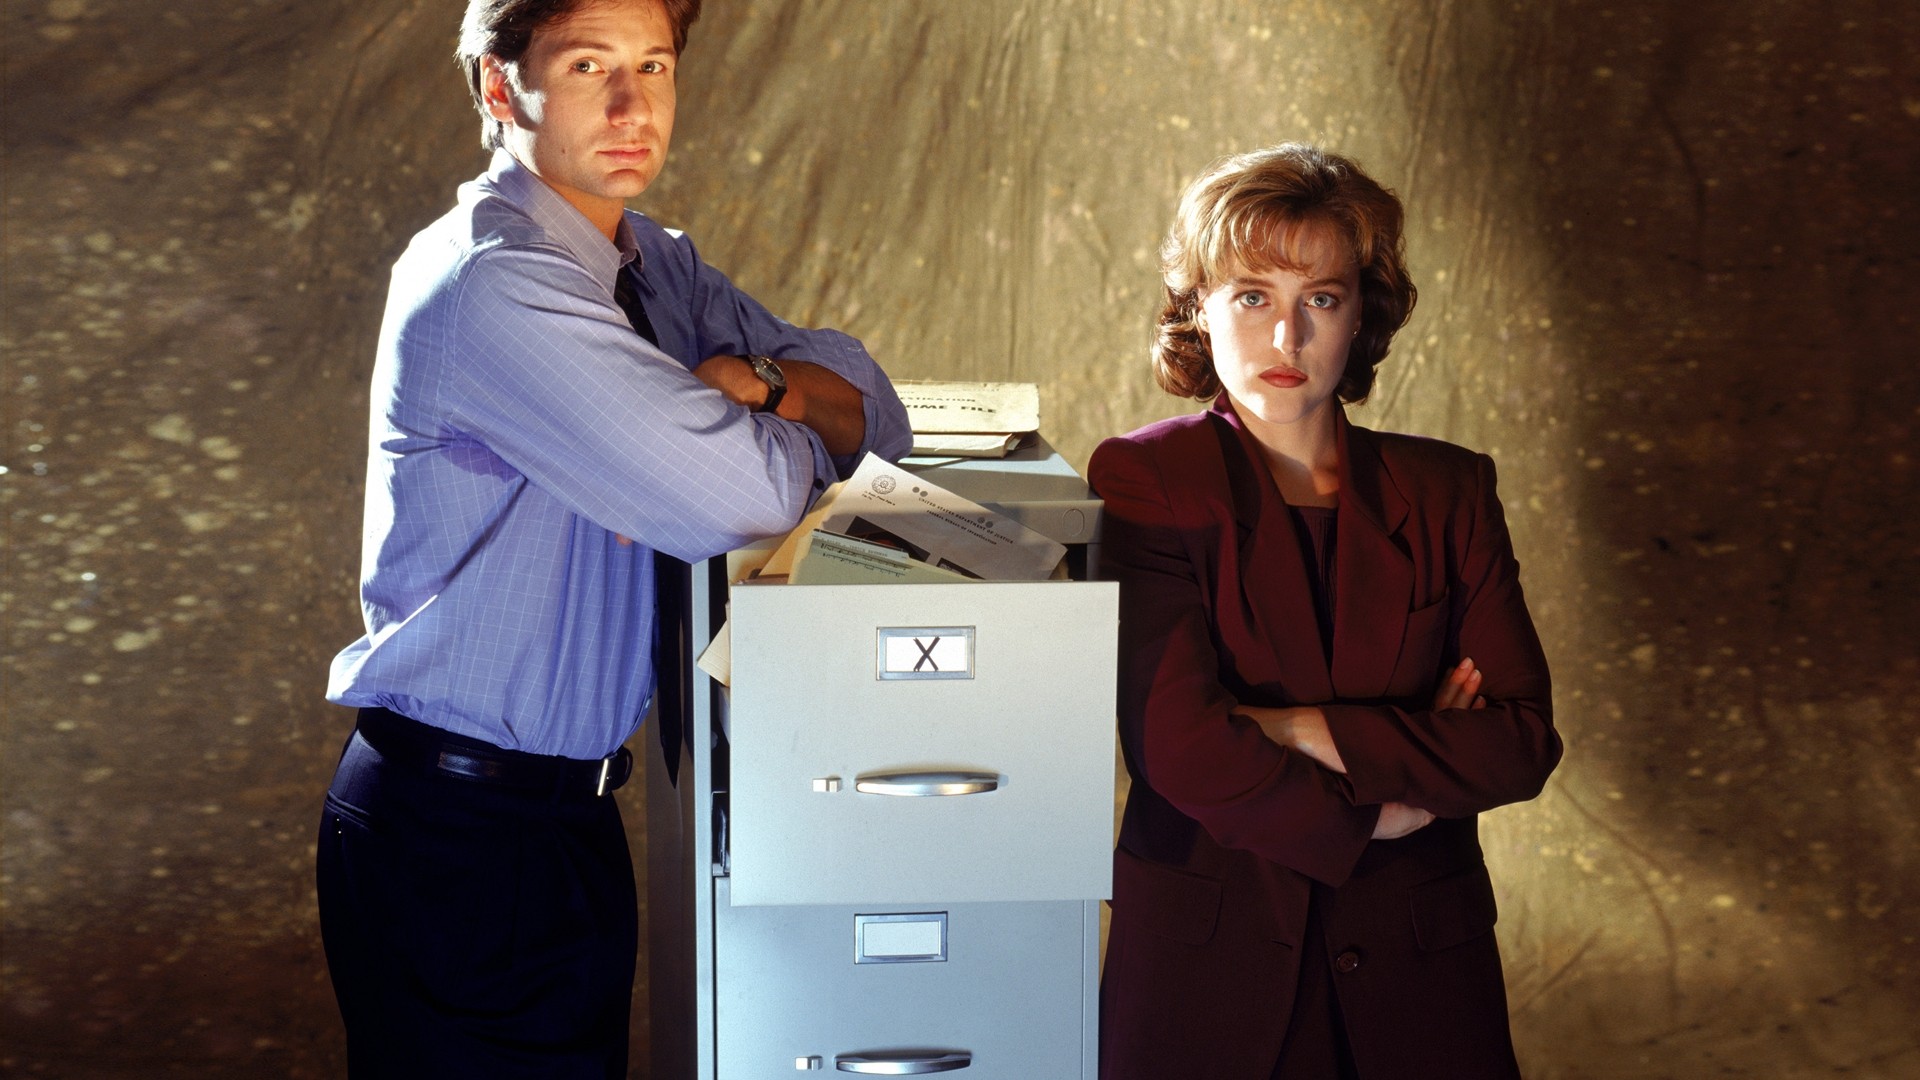 Fox Mulder Dana Scully The X Files David Duchovny Gillian Anderson Arms Crossed Arms On Chest 1920x1080